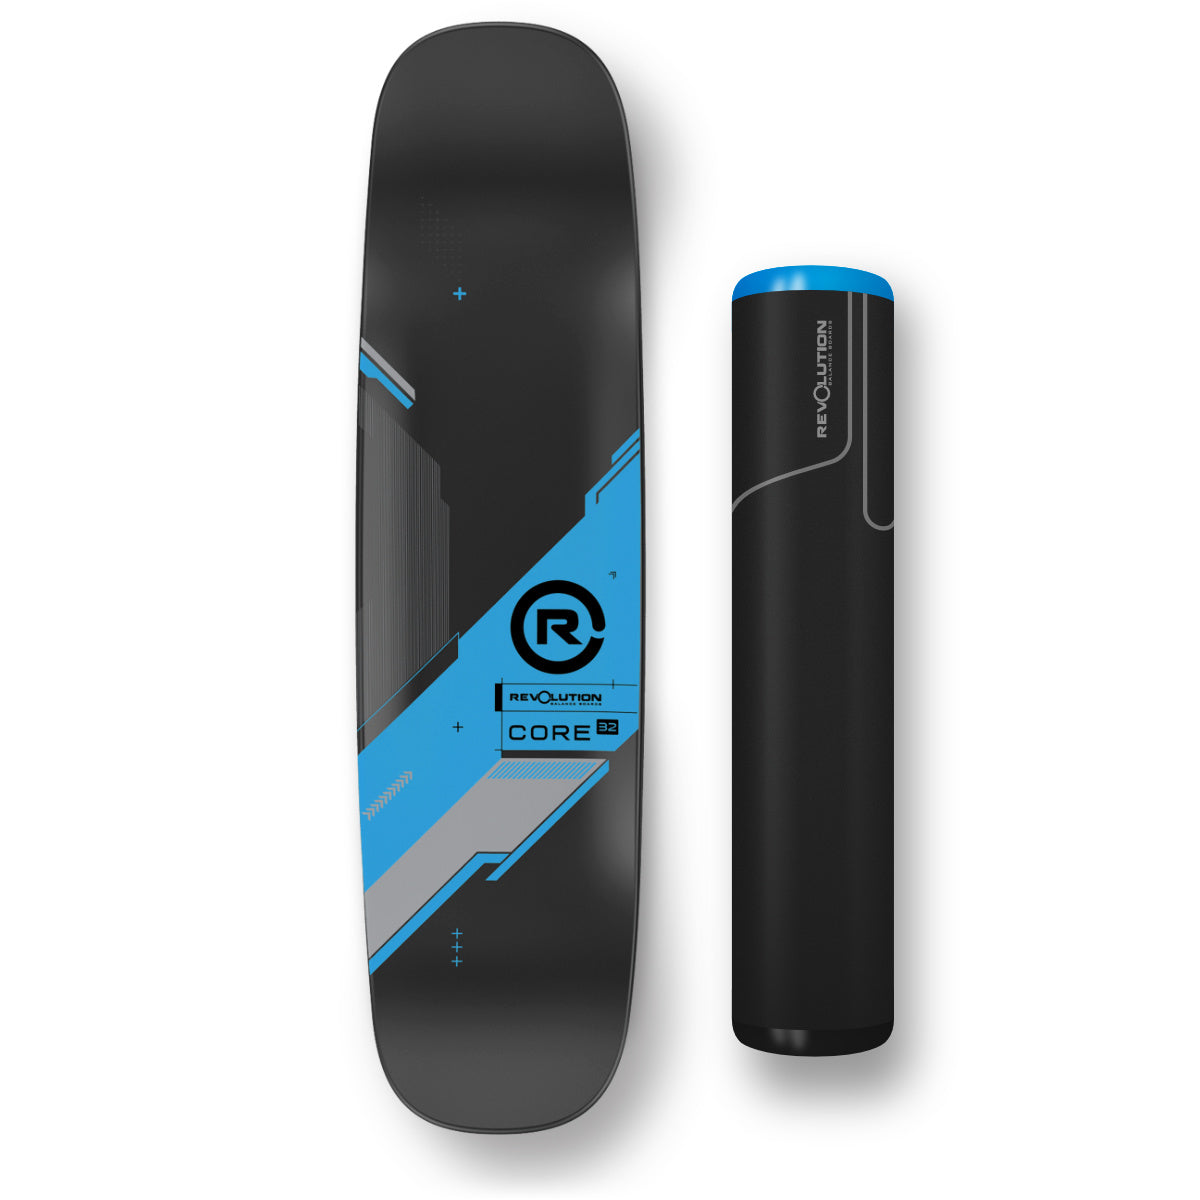 A Revolution Core 32 Balance Board with a battery next to it, perfect for progression and performing tricks. Also known as a balance board.